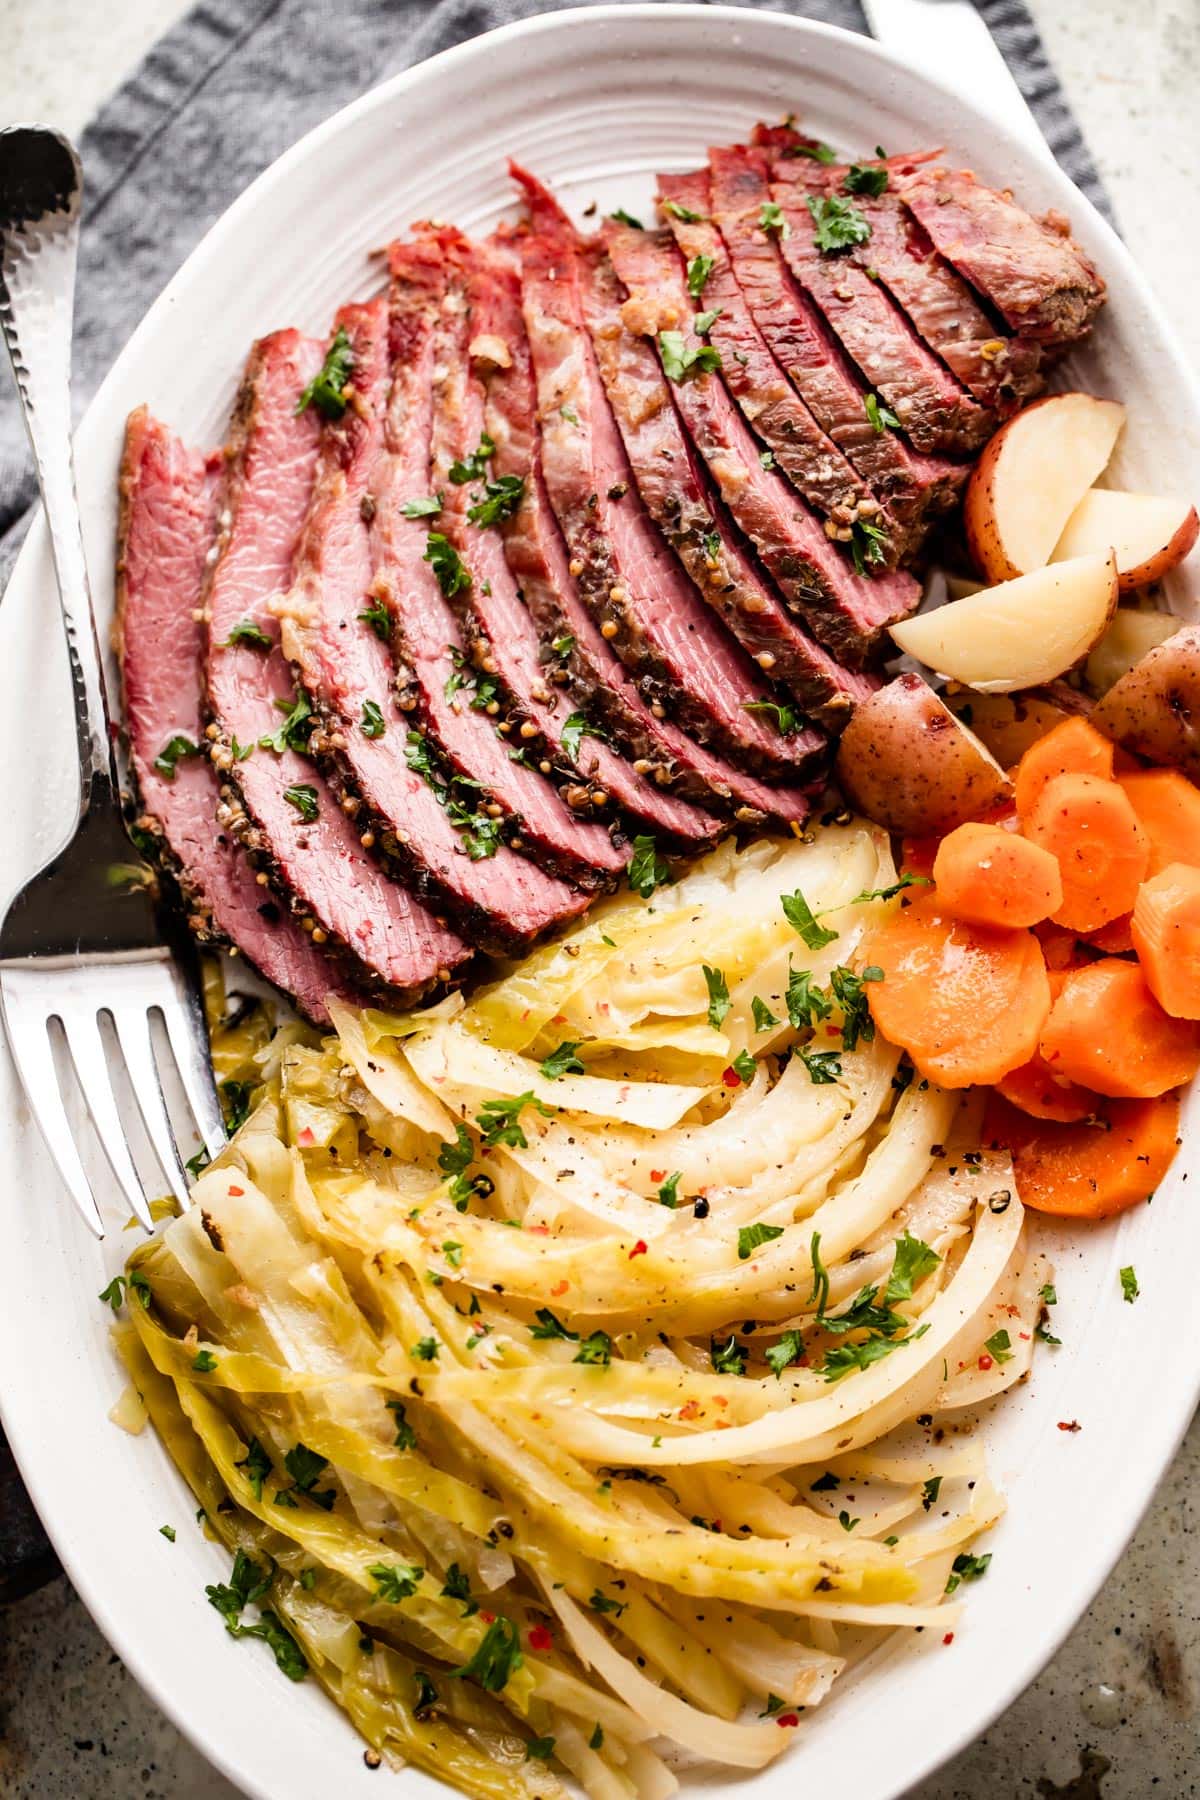 Instant Pot corned beef with cabbage and carrots served on a plate.